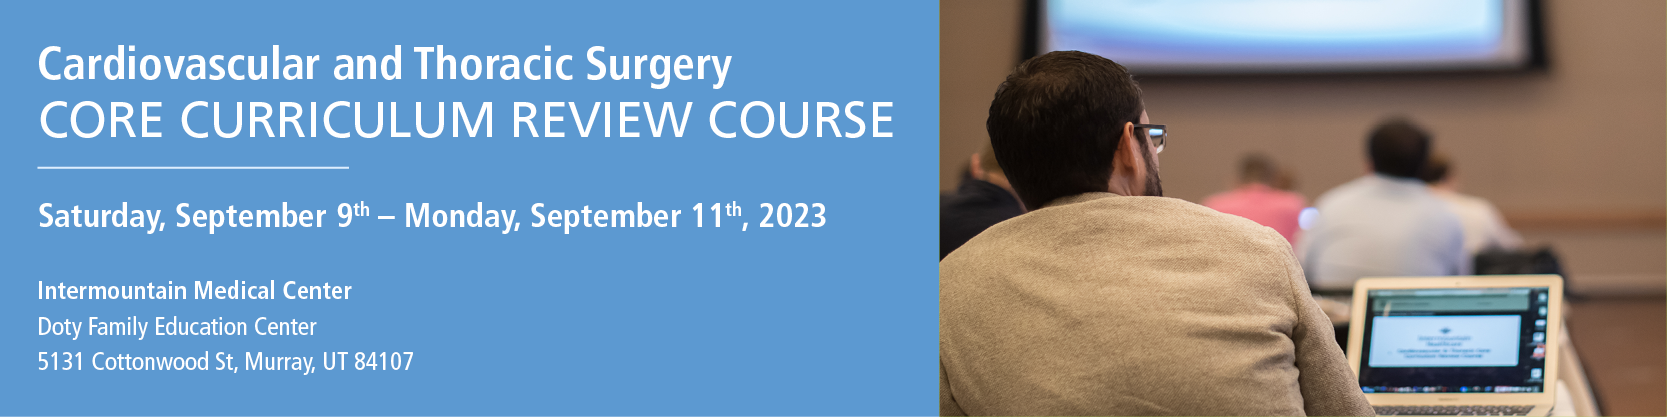 Cardiovascular and Thoracic Surgery Core Curriculum Review Course - 2023 Banner